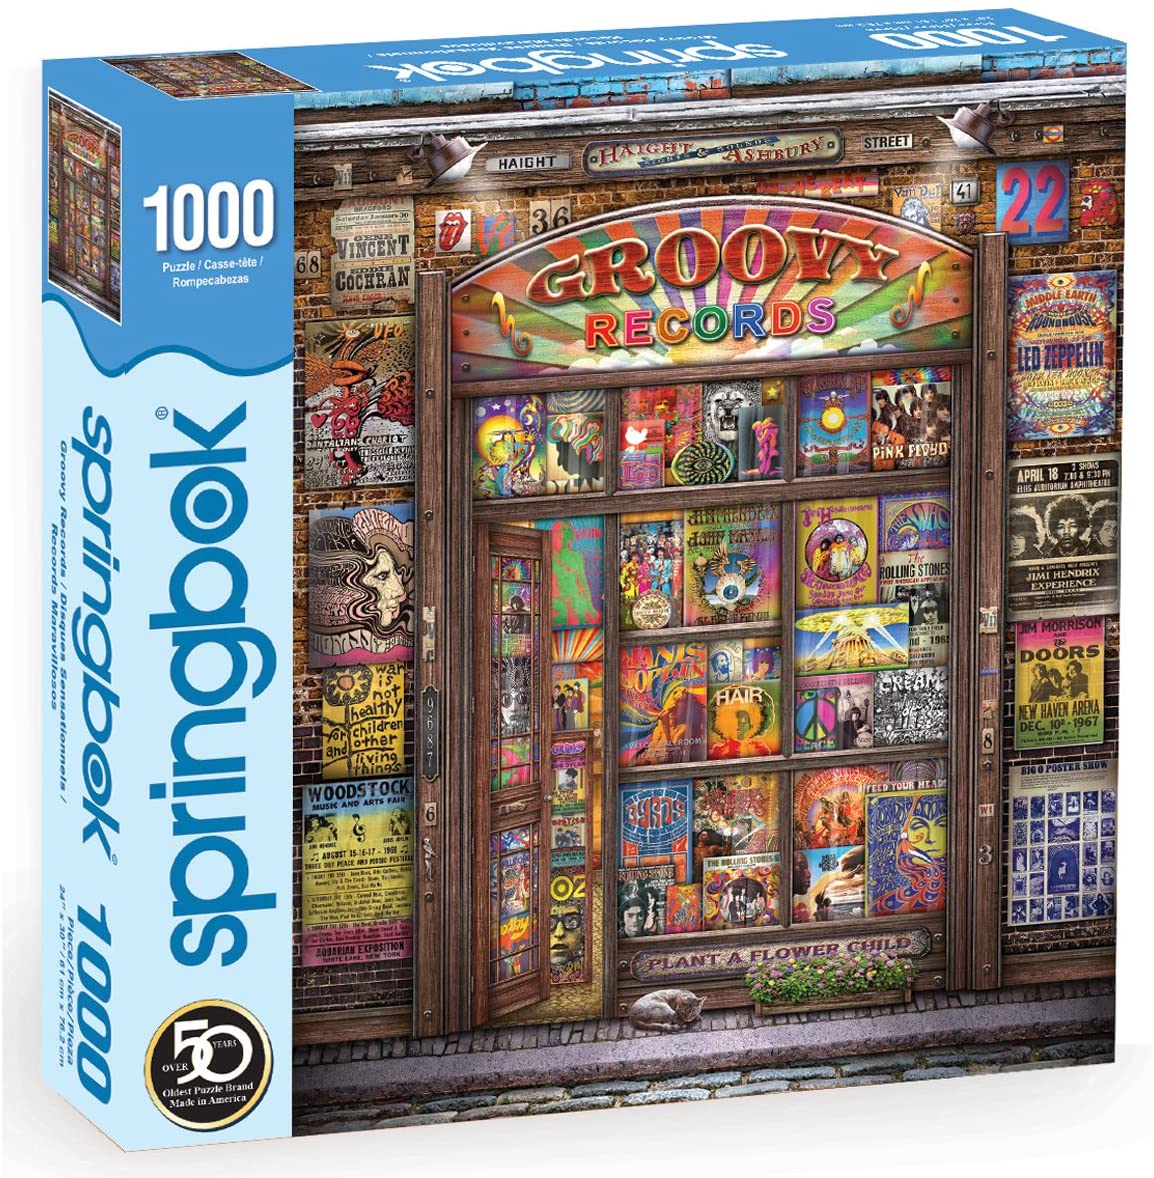 Groovy Records (1000 pc puzzle)